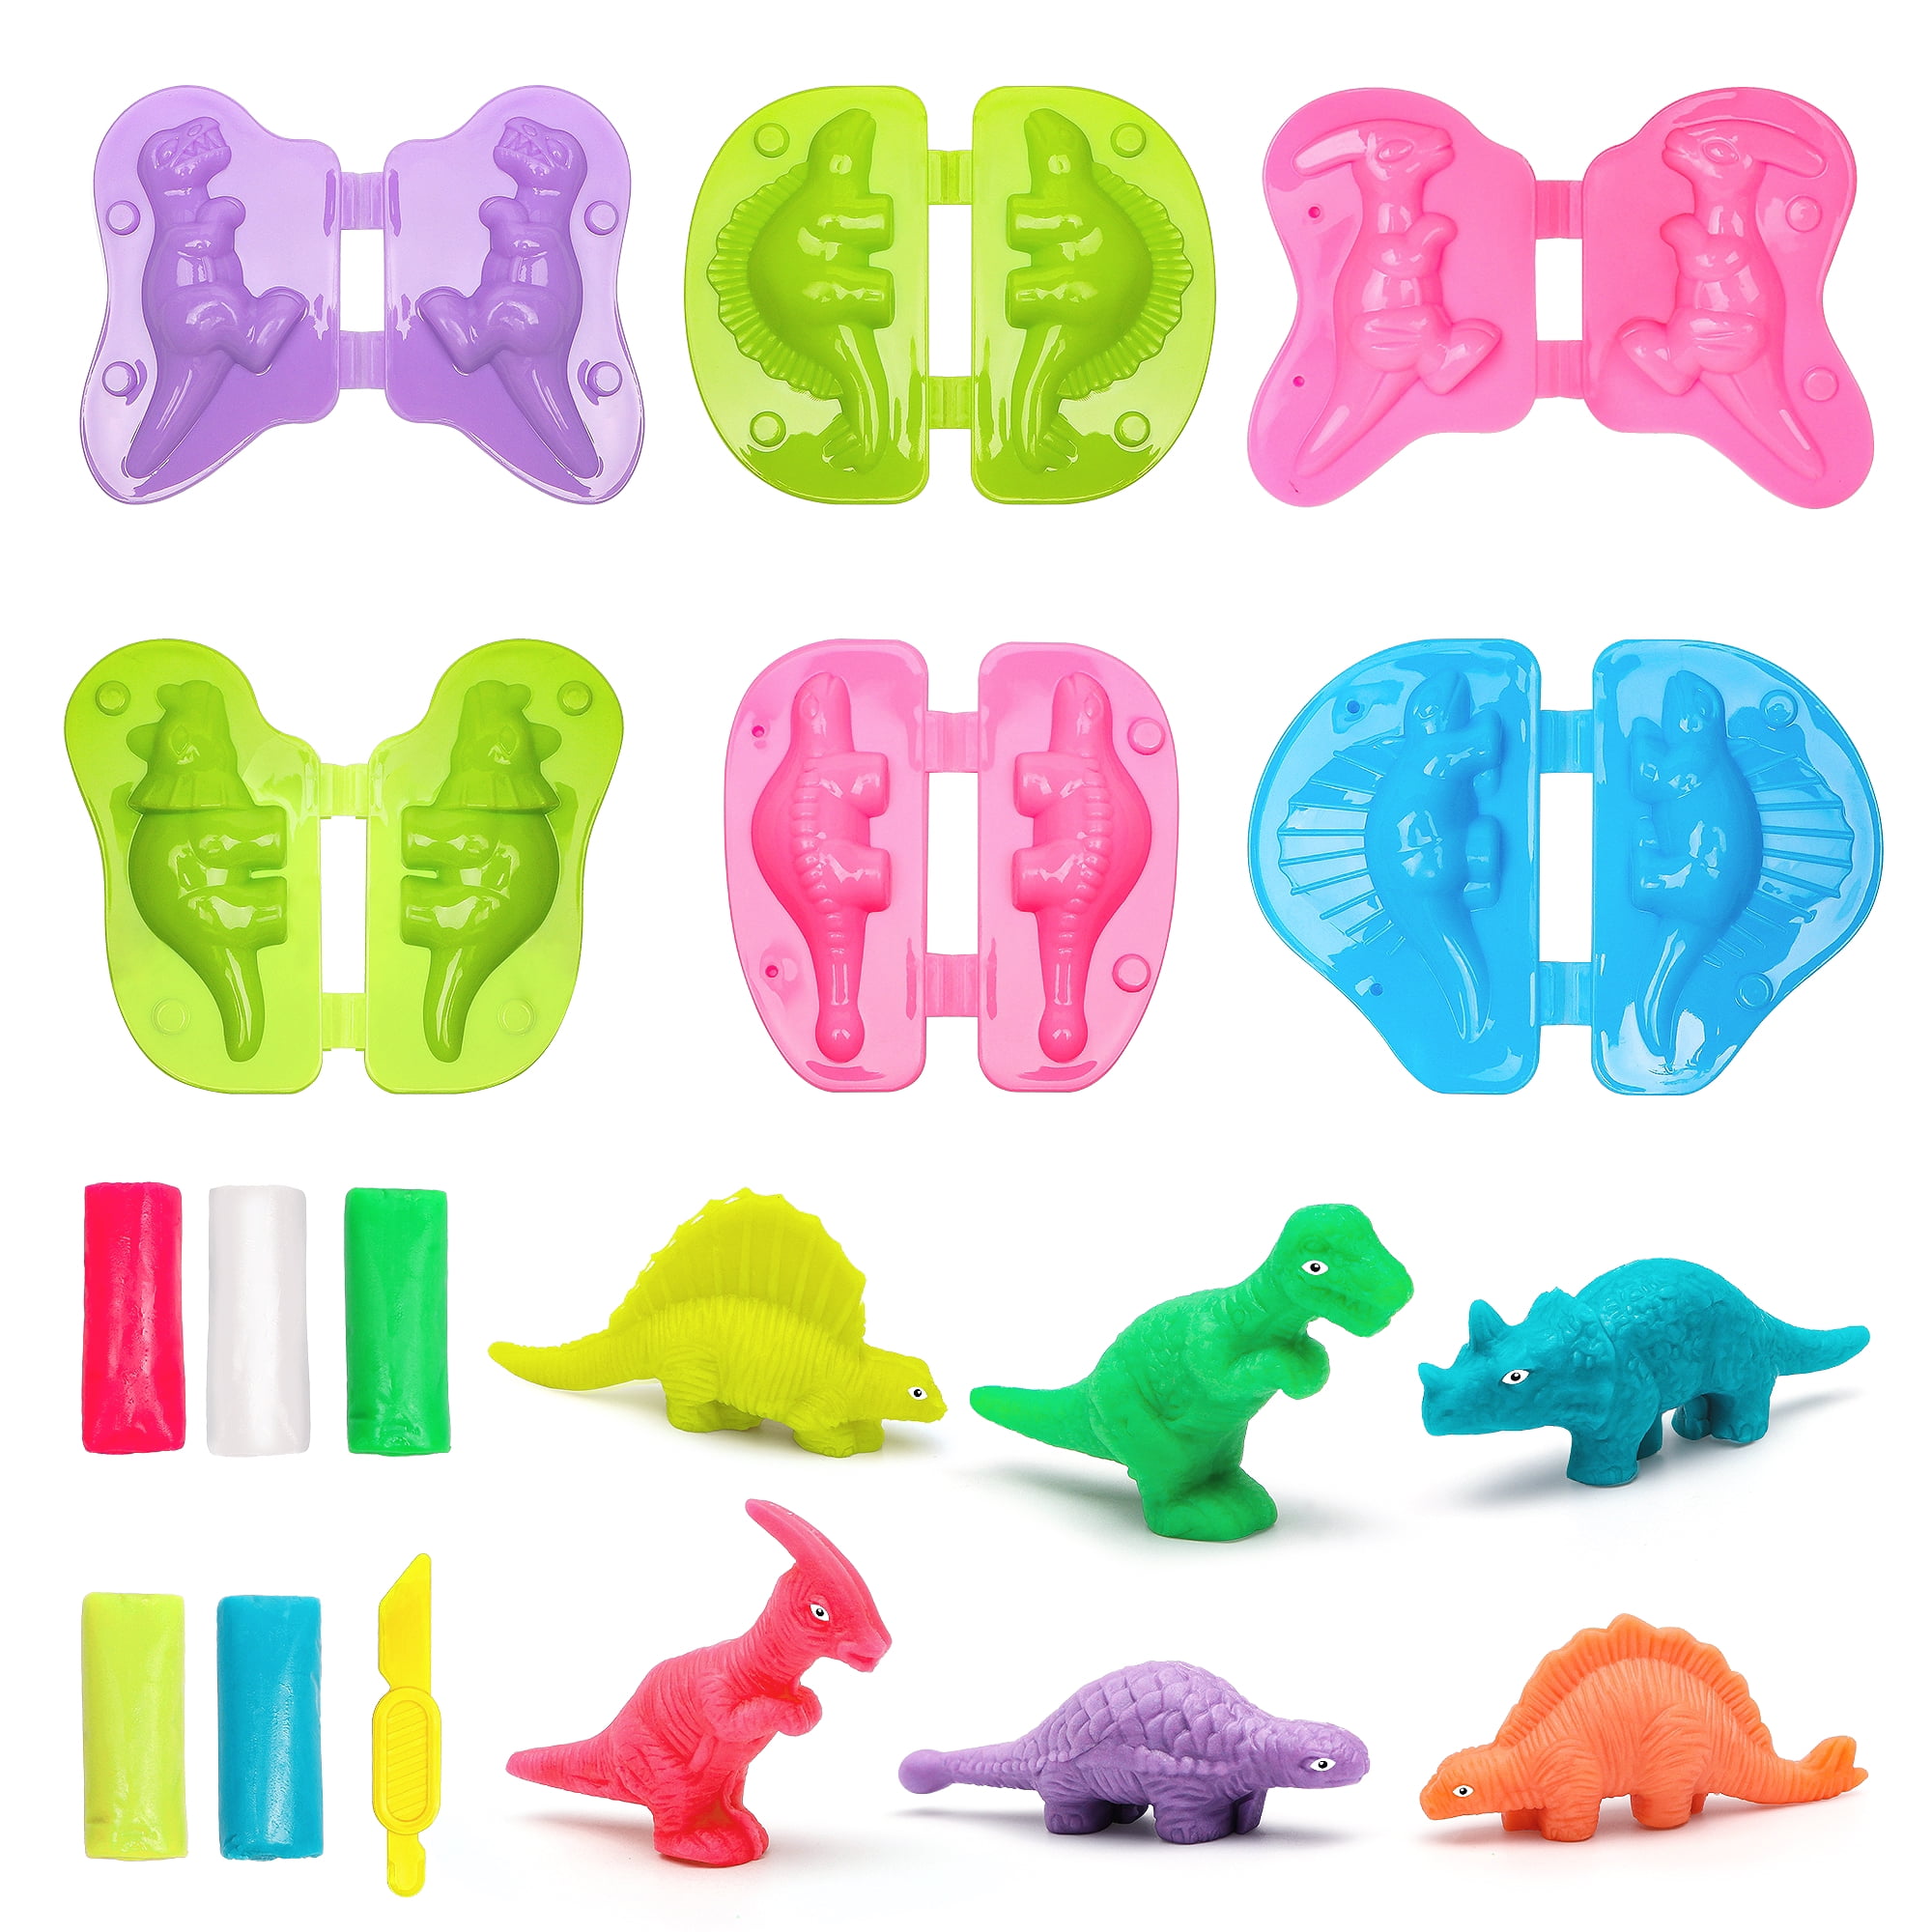 QSHQ Playdough Set, Playdough hamburger Set with 28 PCS Play Dough  Accessories and Play Clay Sets with 12 Colors Dough for 3 4 5 6 Years Old  Boys and Girls Birthday Gift 